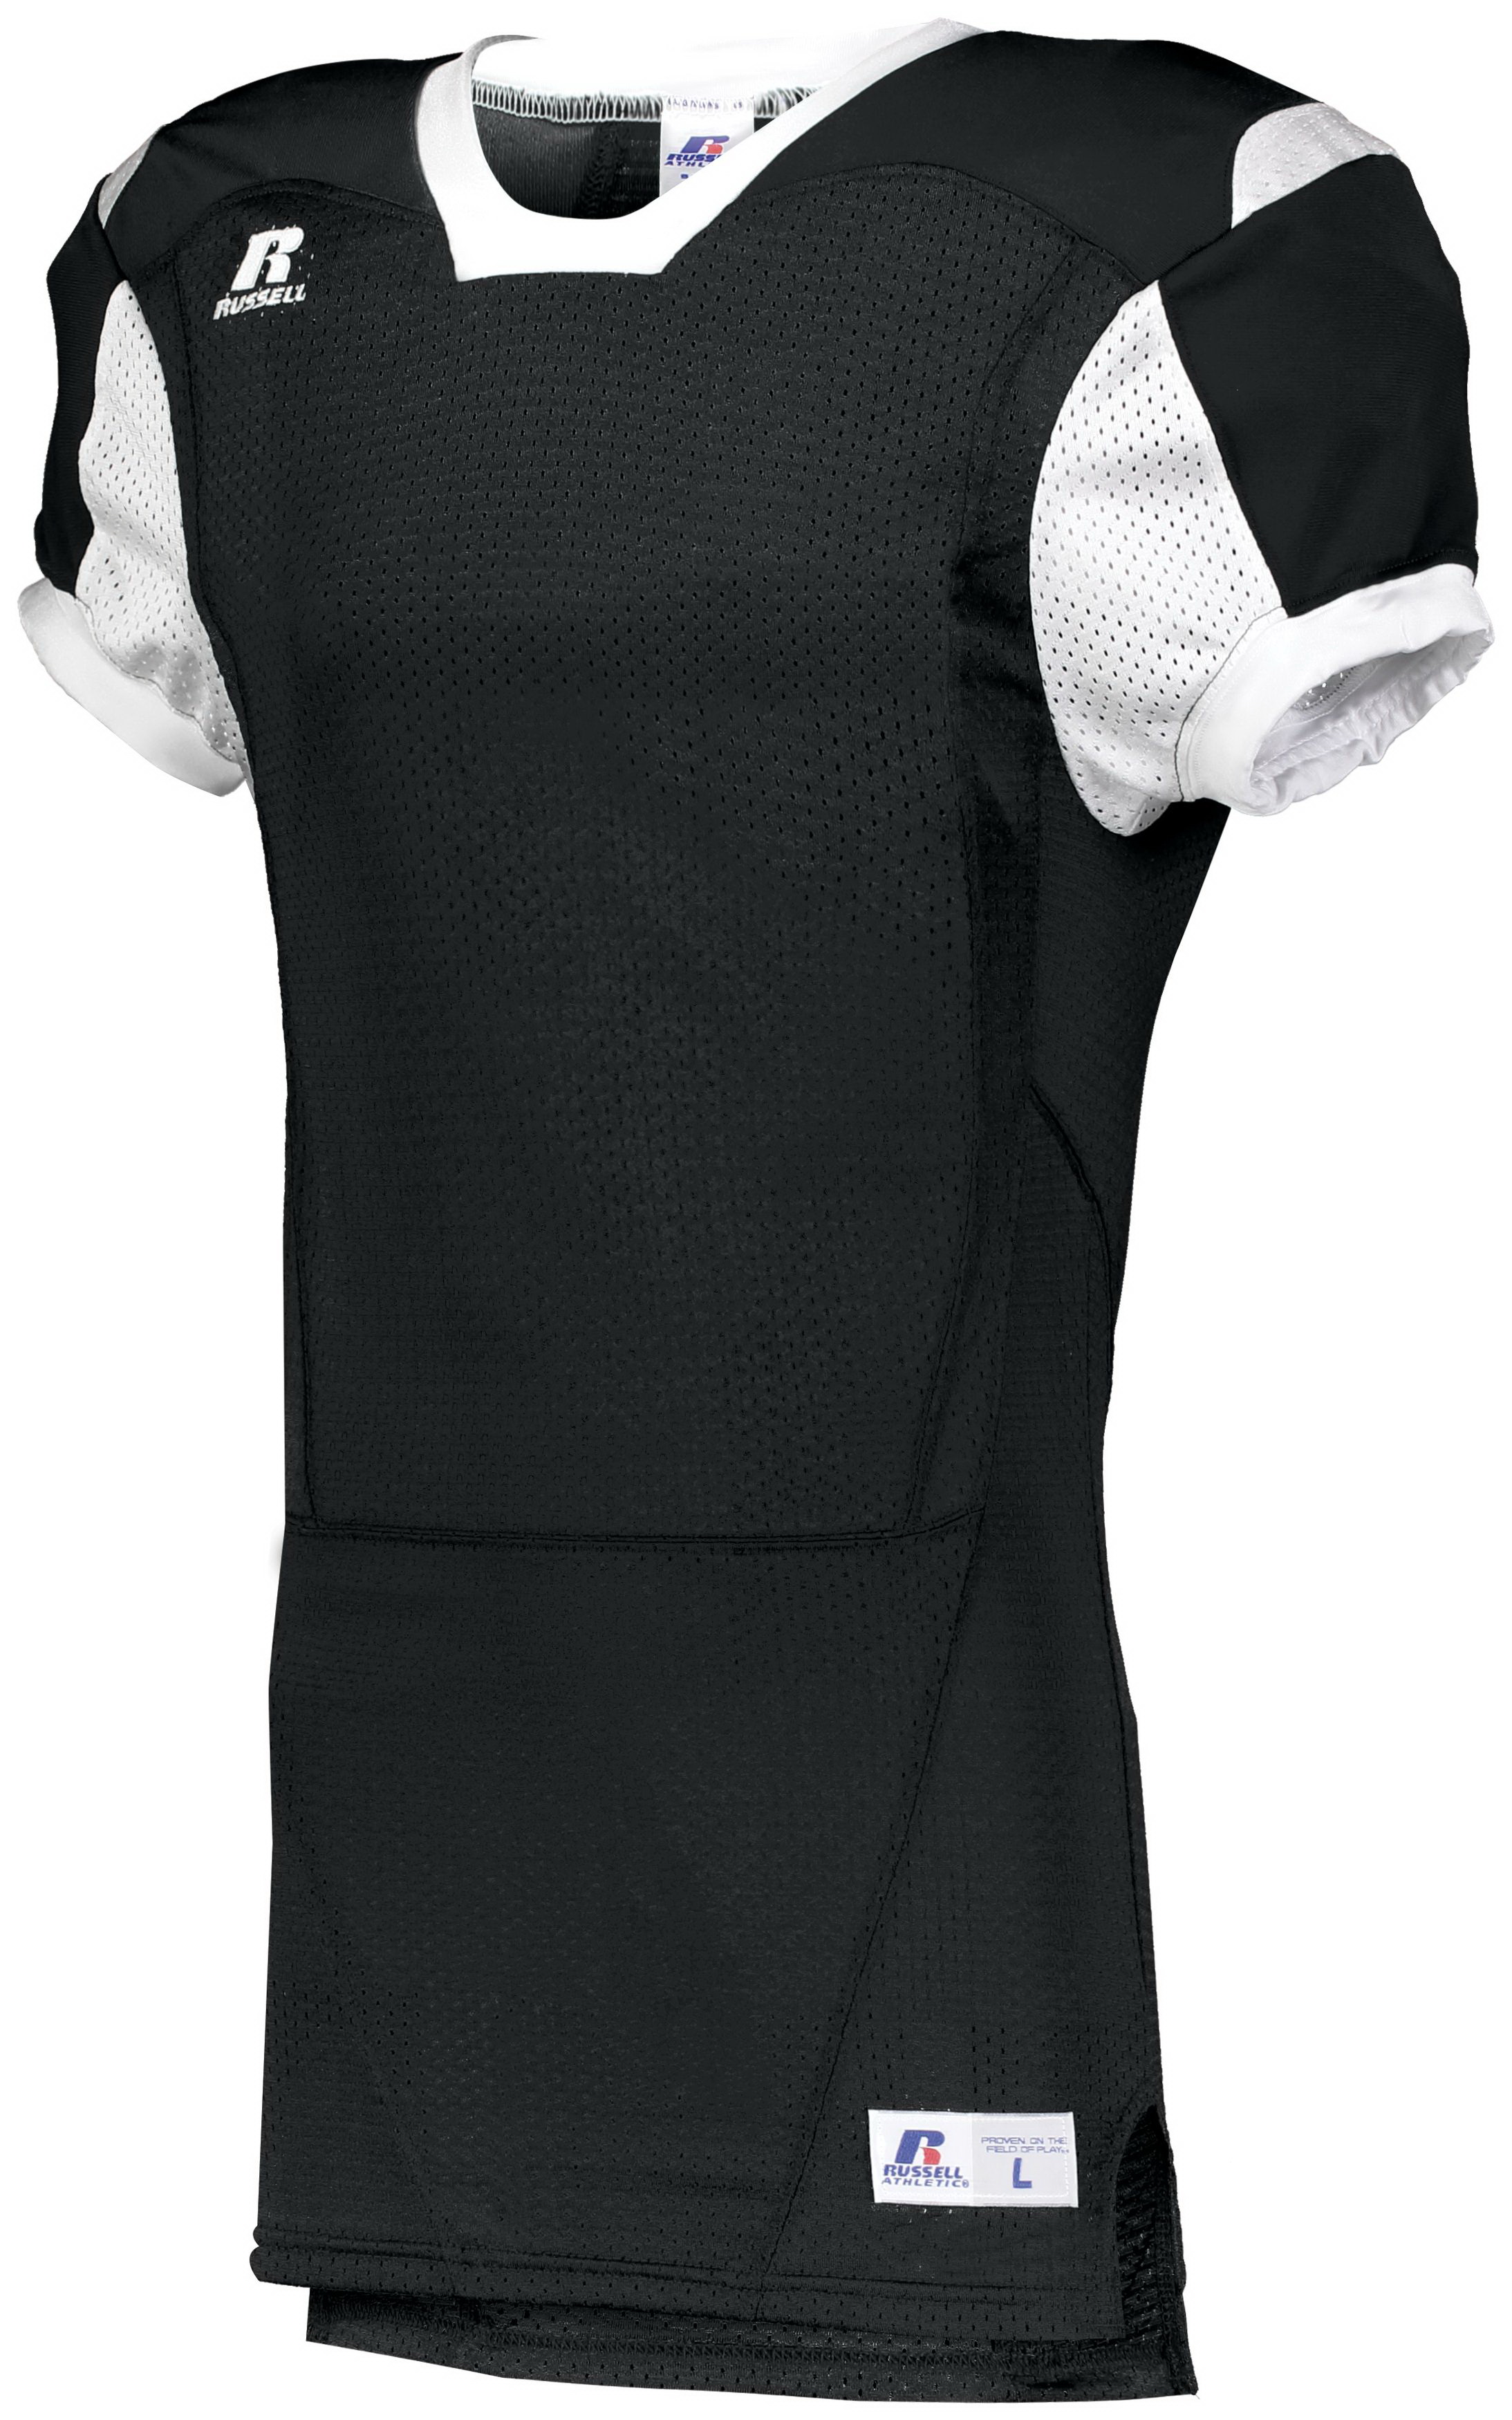 Russell Athletic S05SMM Stretch Mesh Game Jersey 